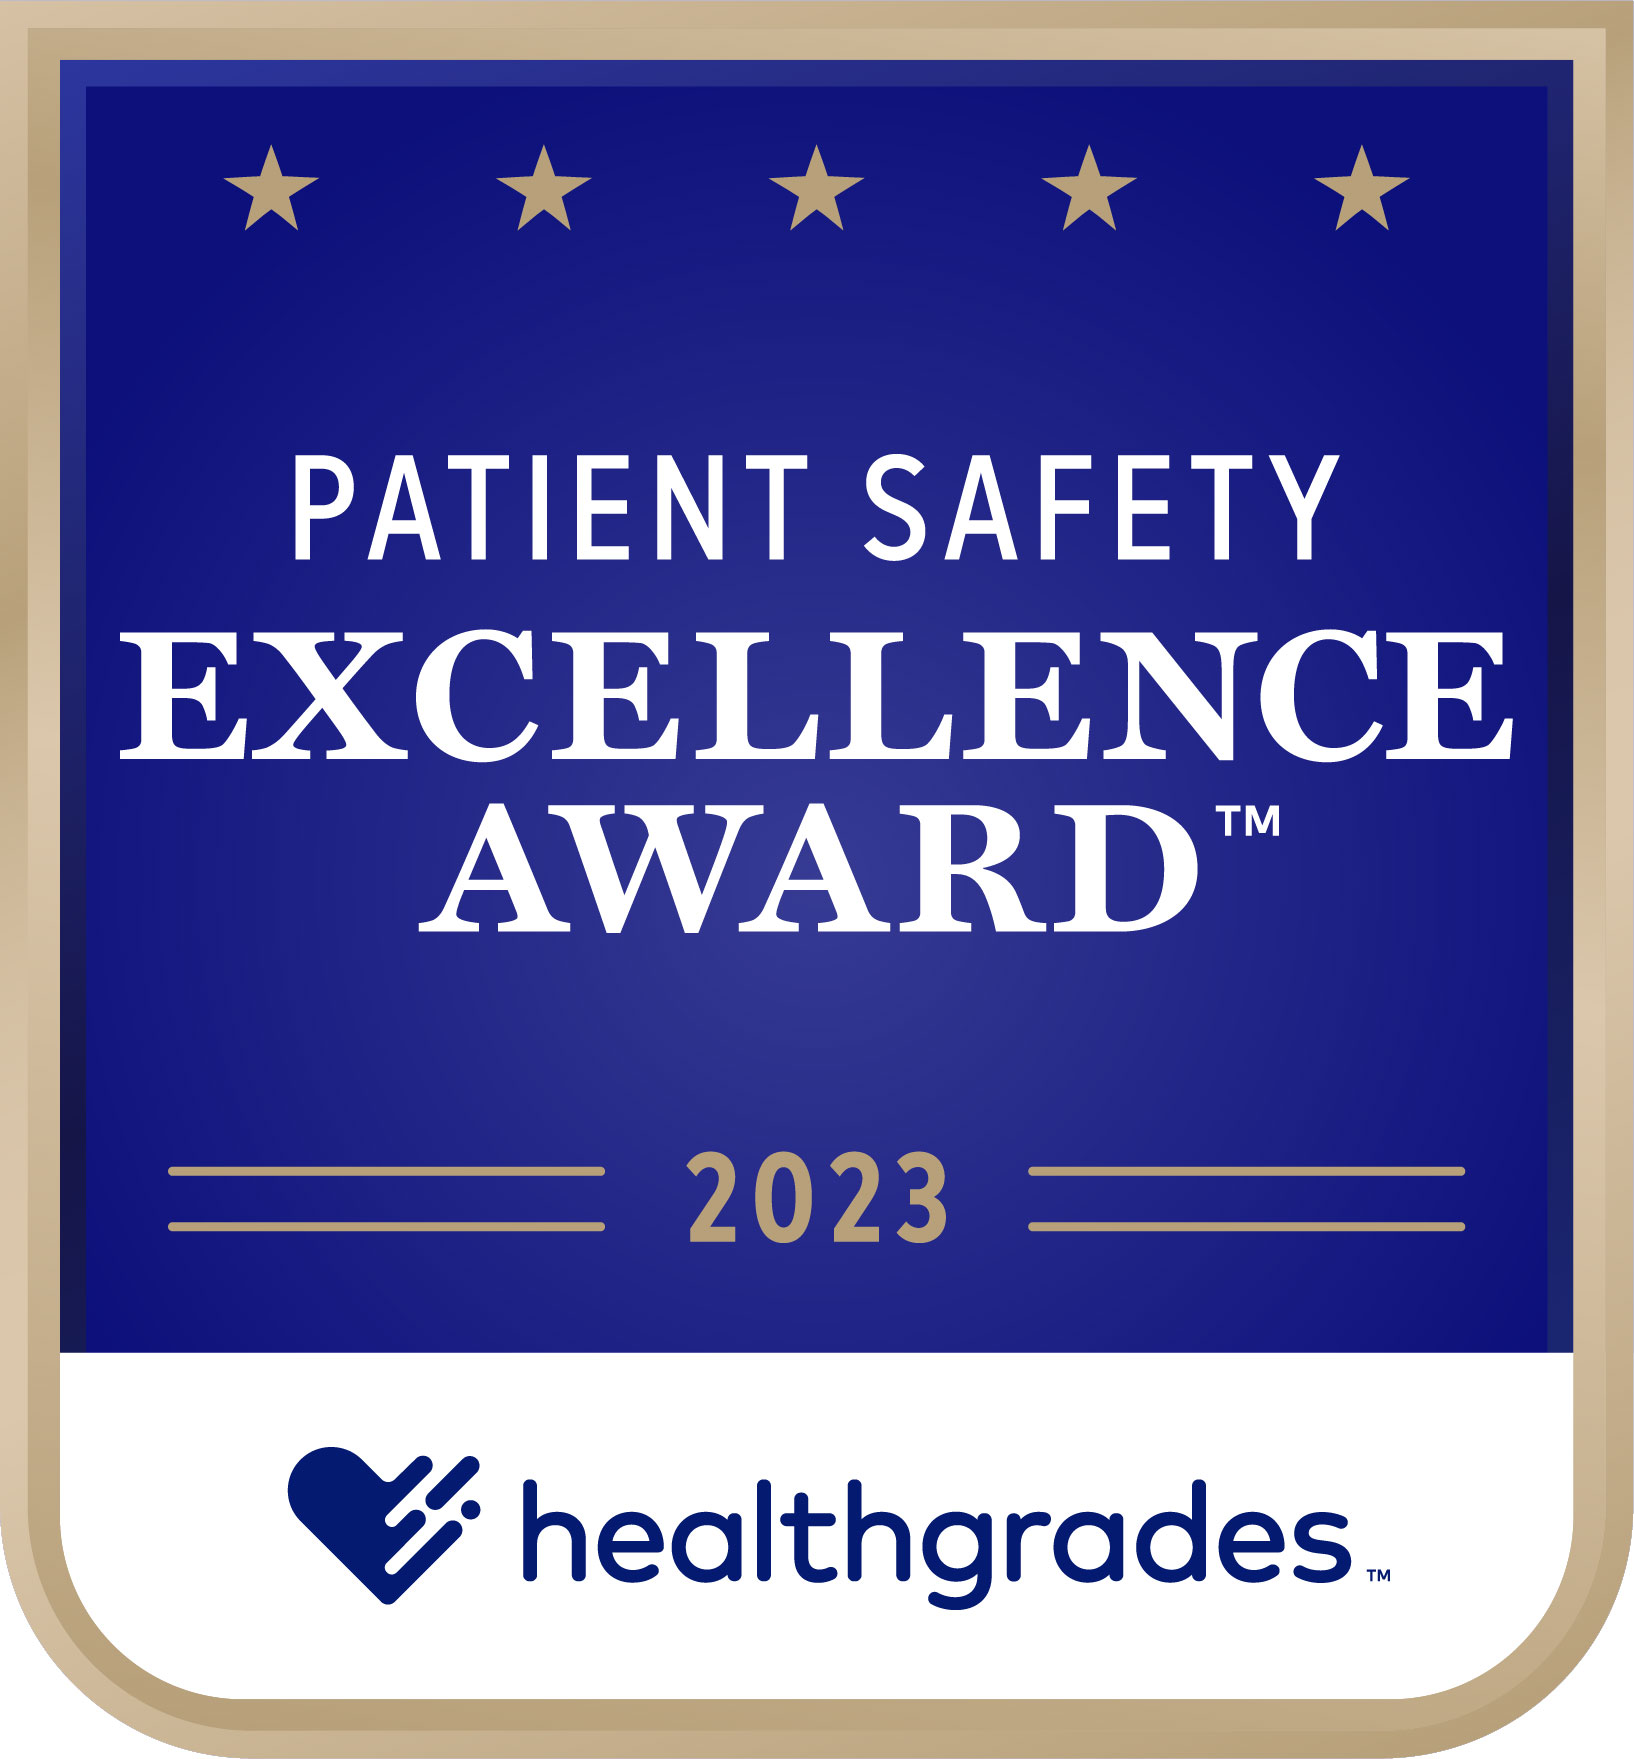 HG_Patient_Safety_Award_Image_2023